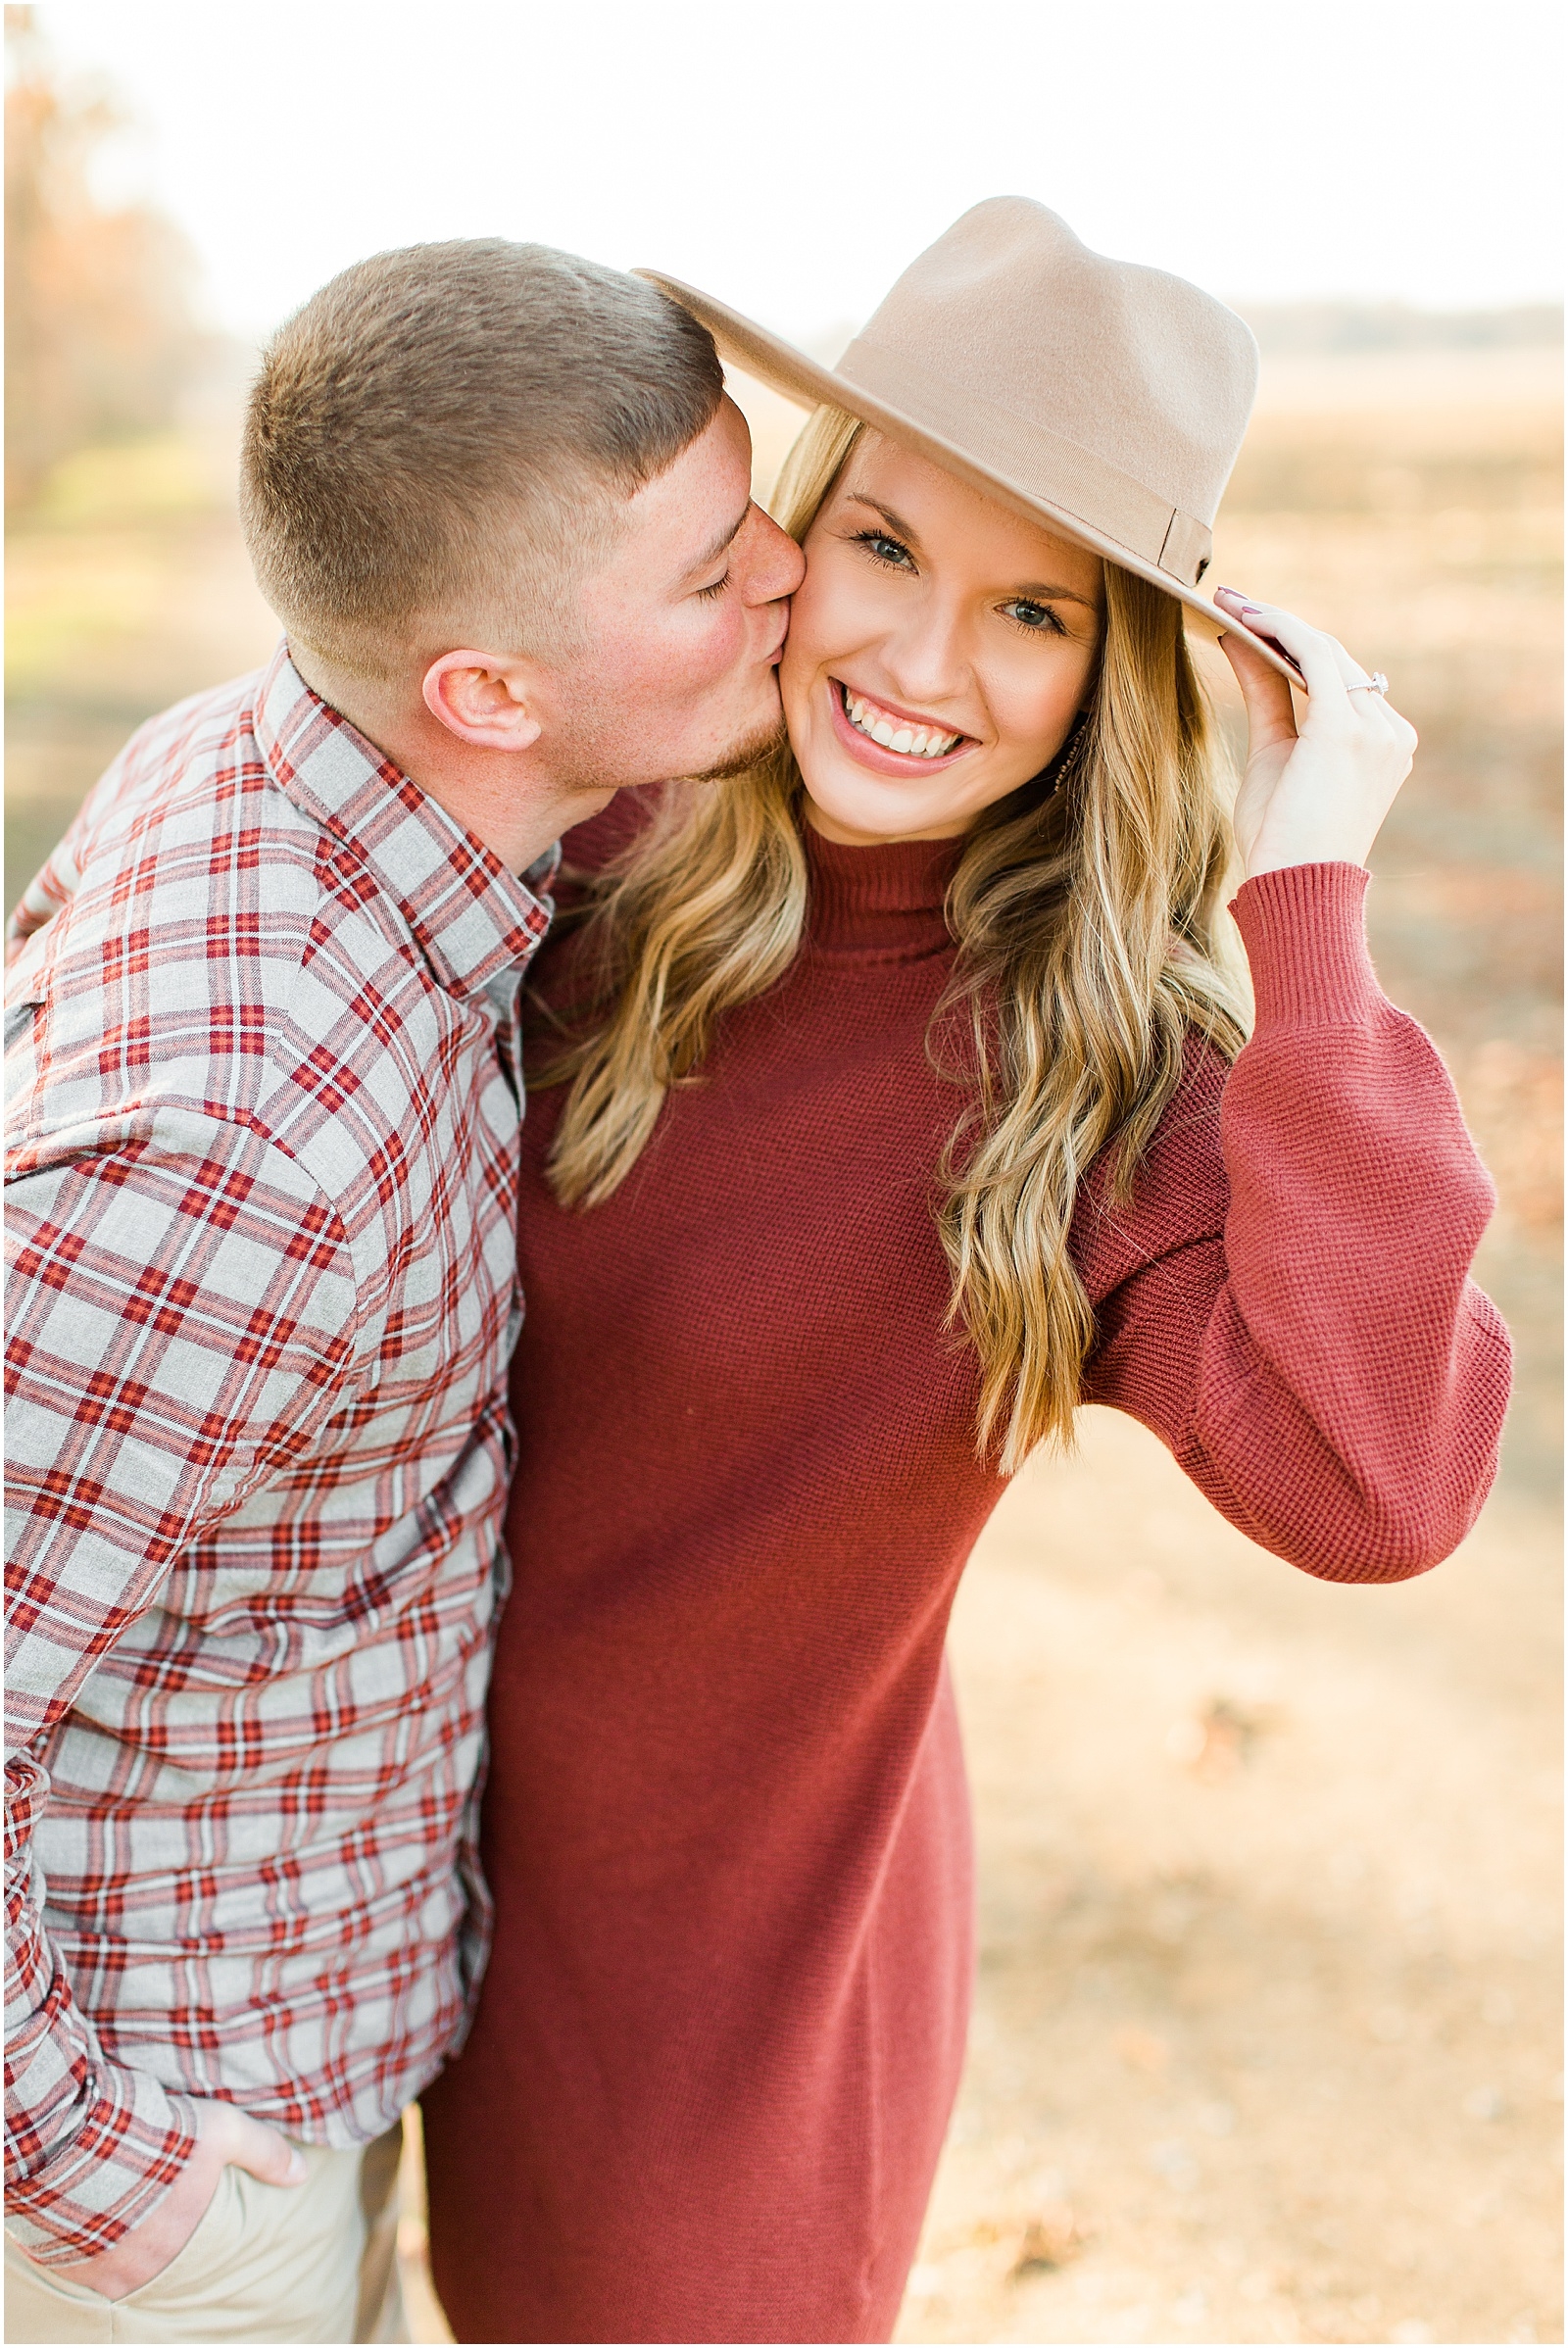 A Fall Southern Indiana Engagement Seesion | Cody and Hannah | Bret and Brandie Photography 010.jpg